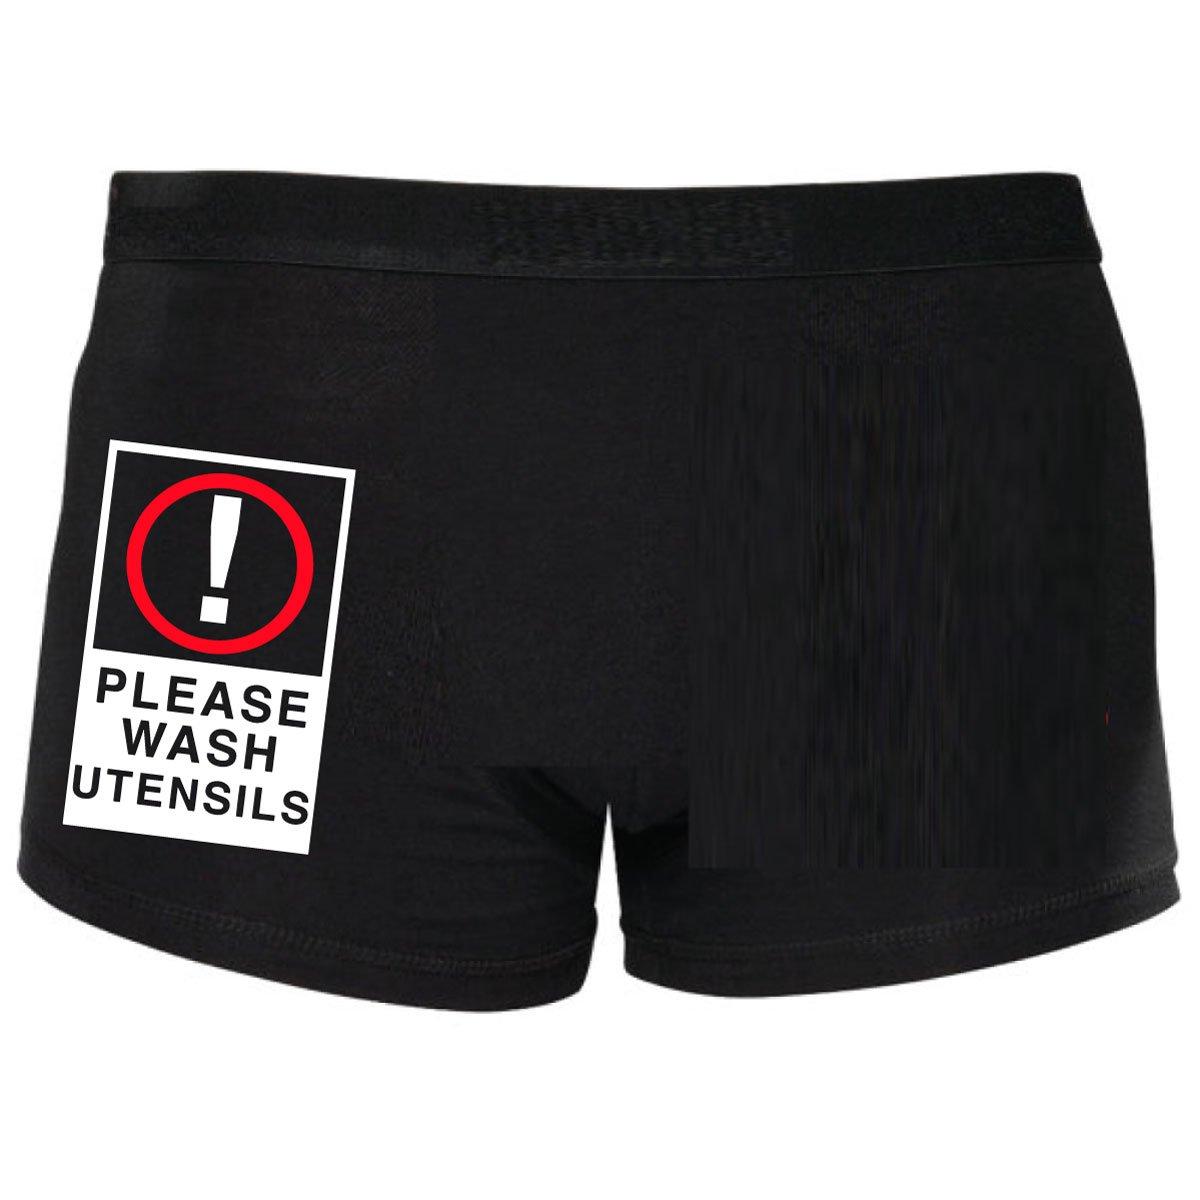 Funny Boxers Please Wash Utensils Shorty Boxers